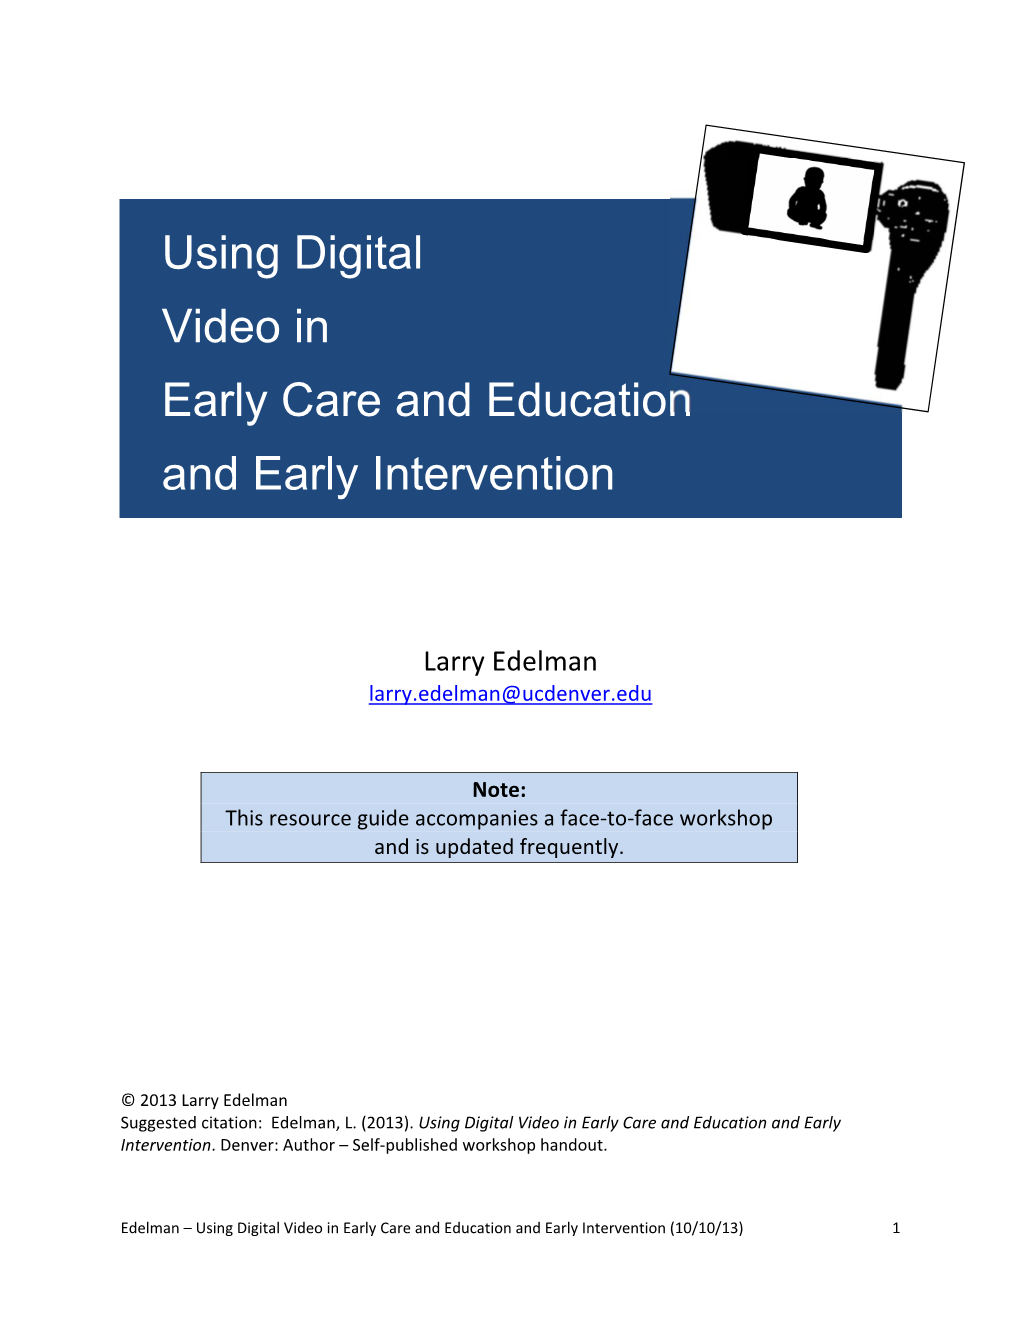 Using Digital Video in Early Care and Education and Early Intervention